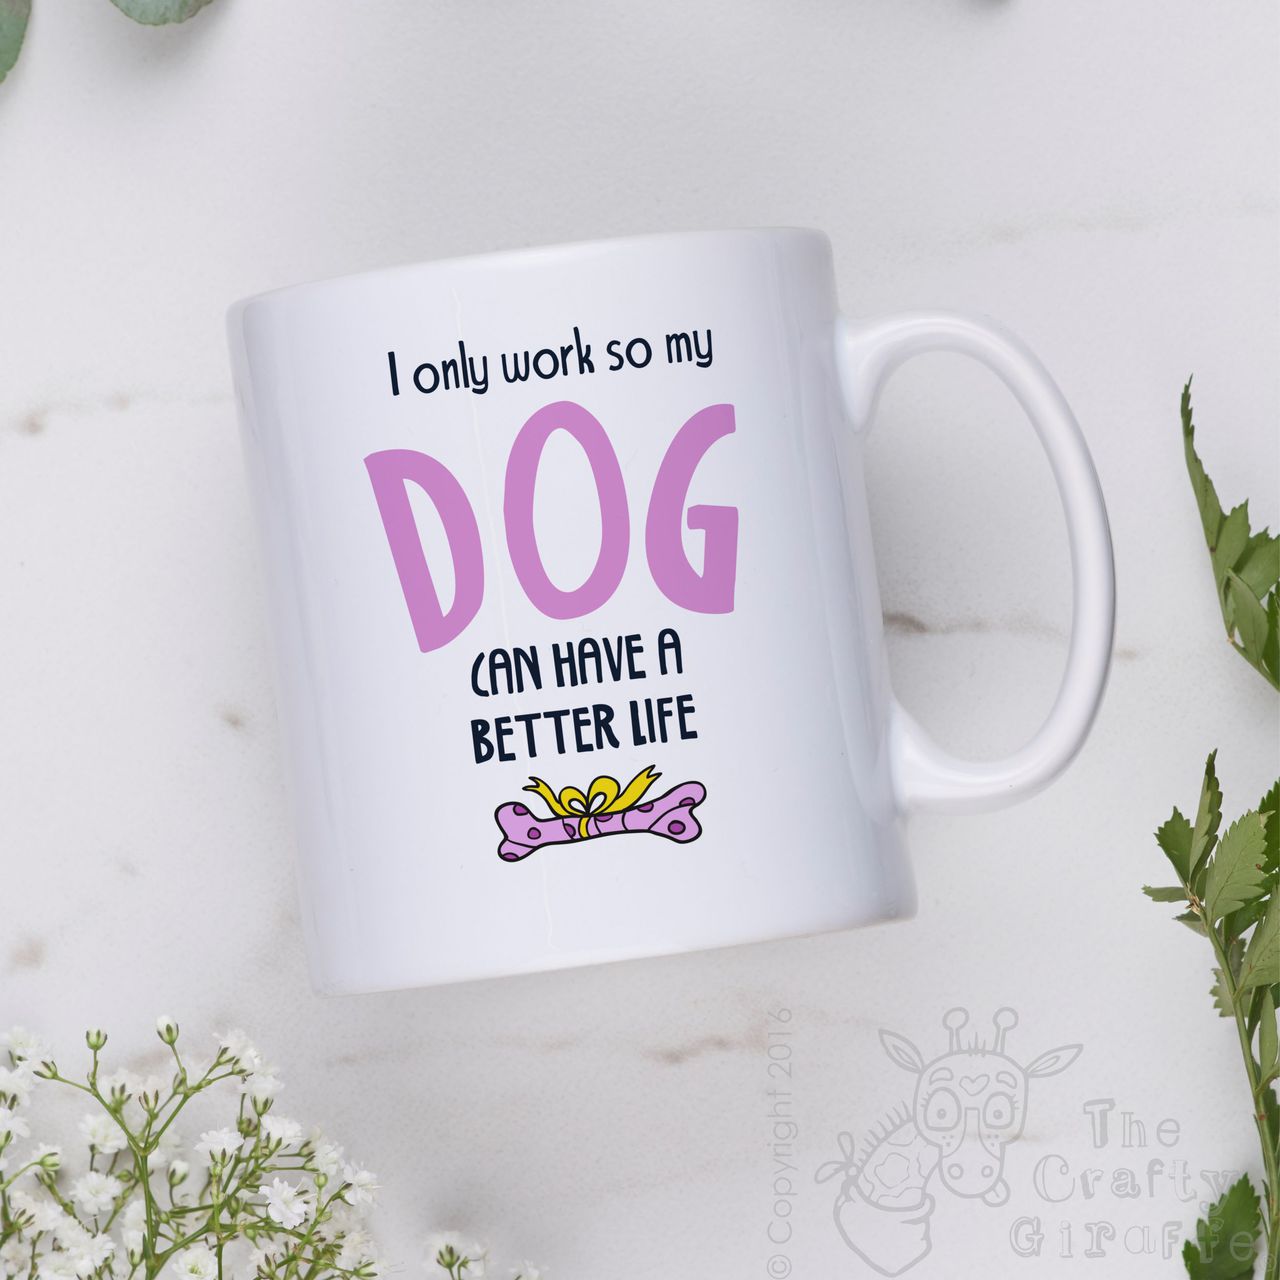 I only work so my dog can have a better life Mug – Pink